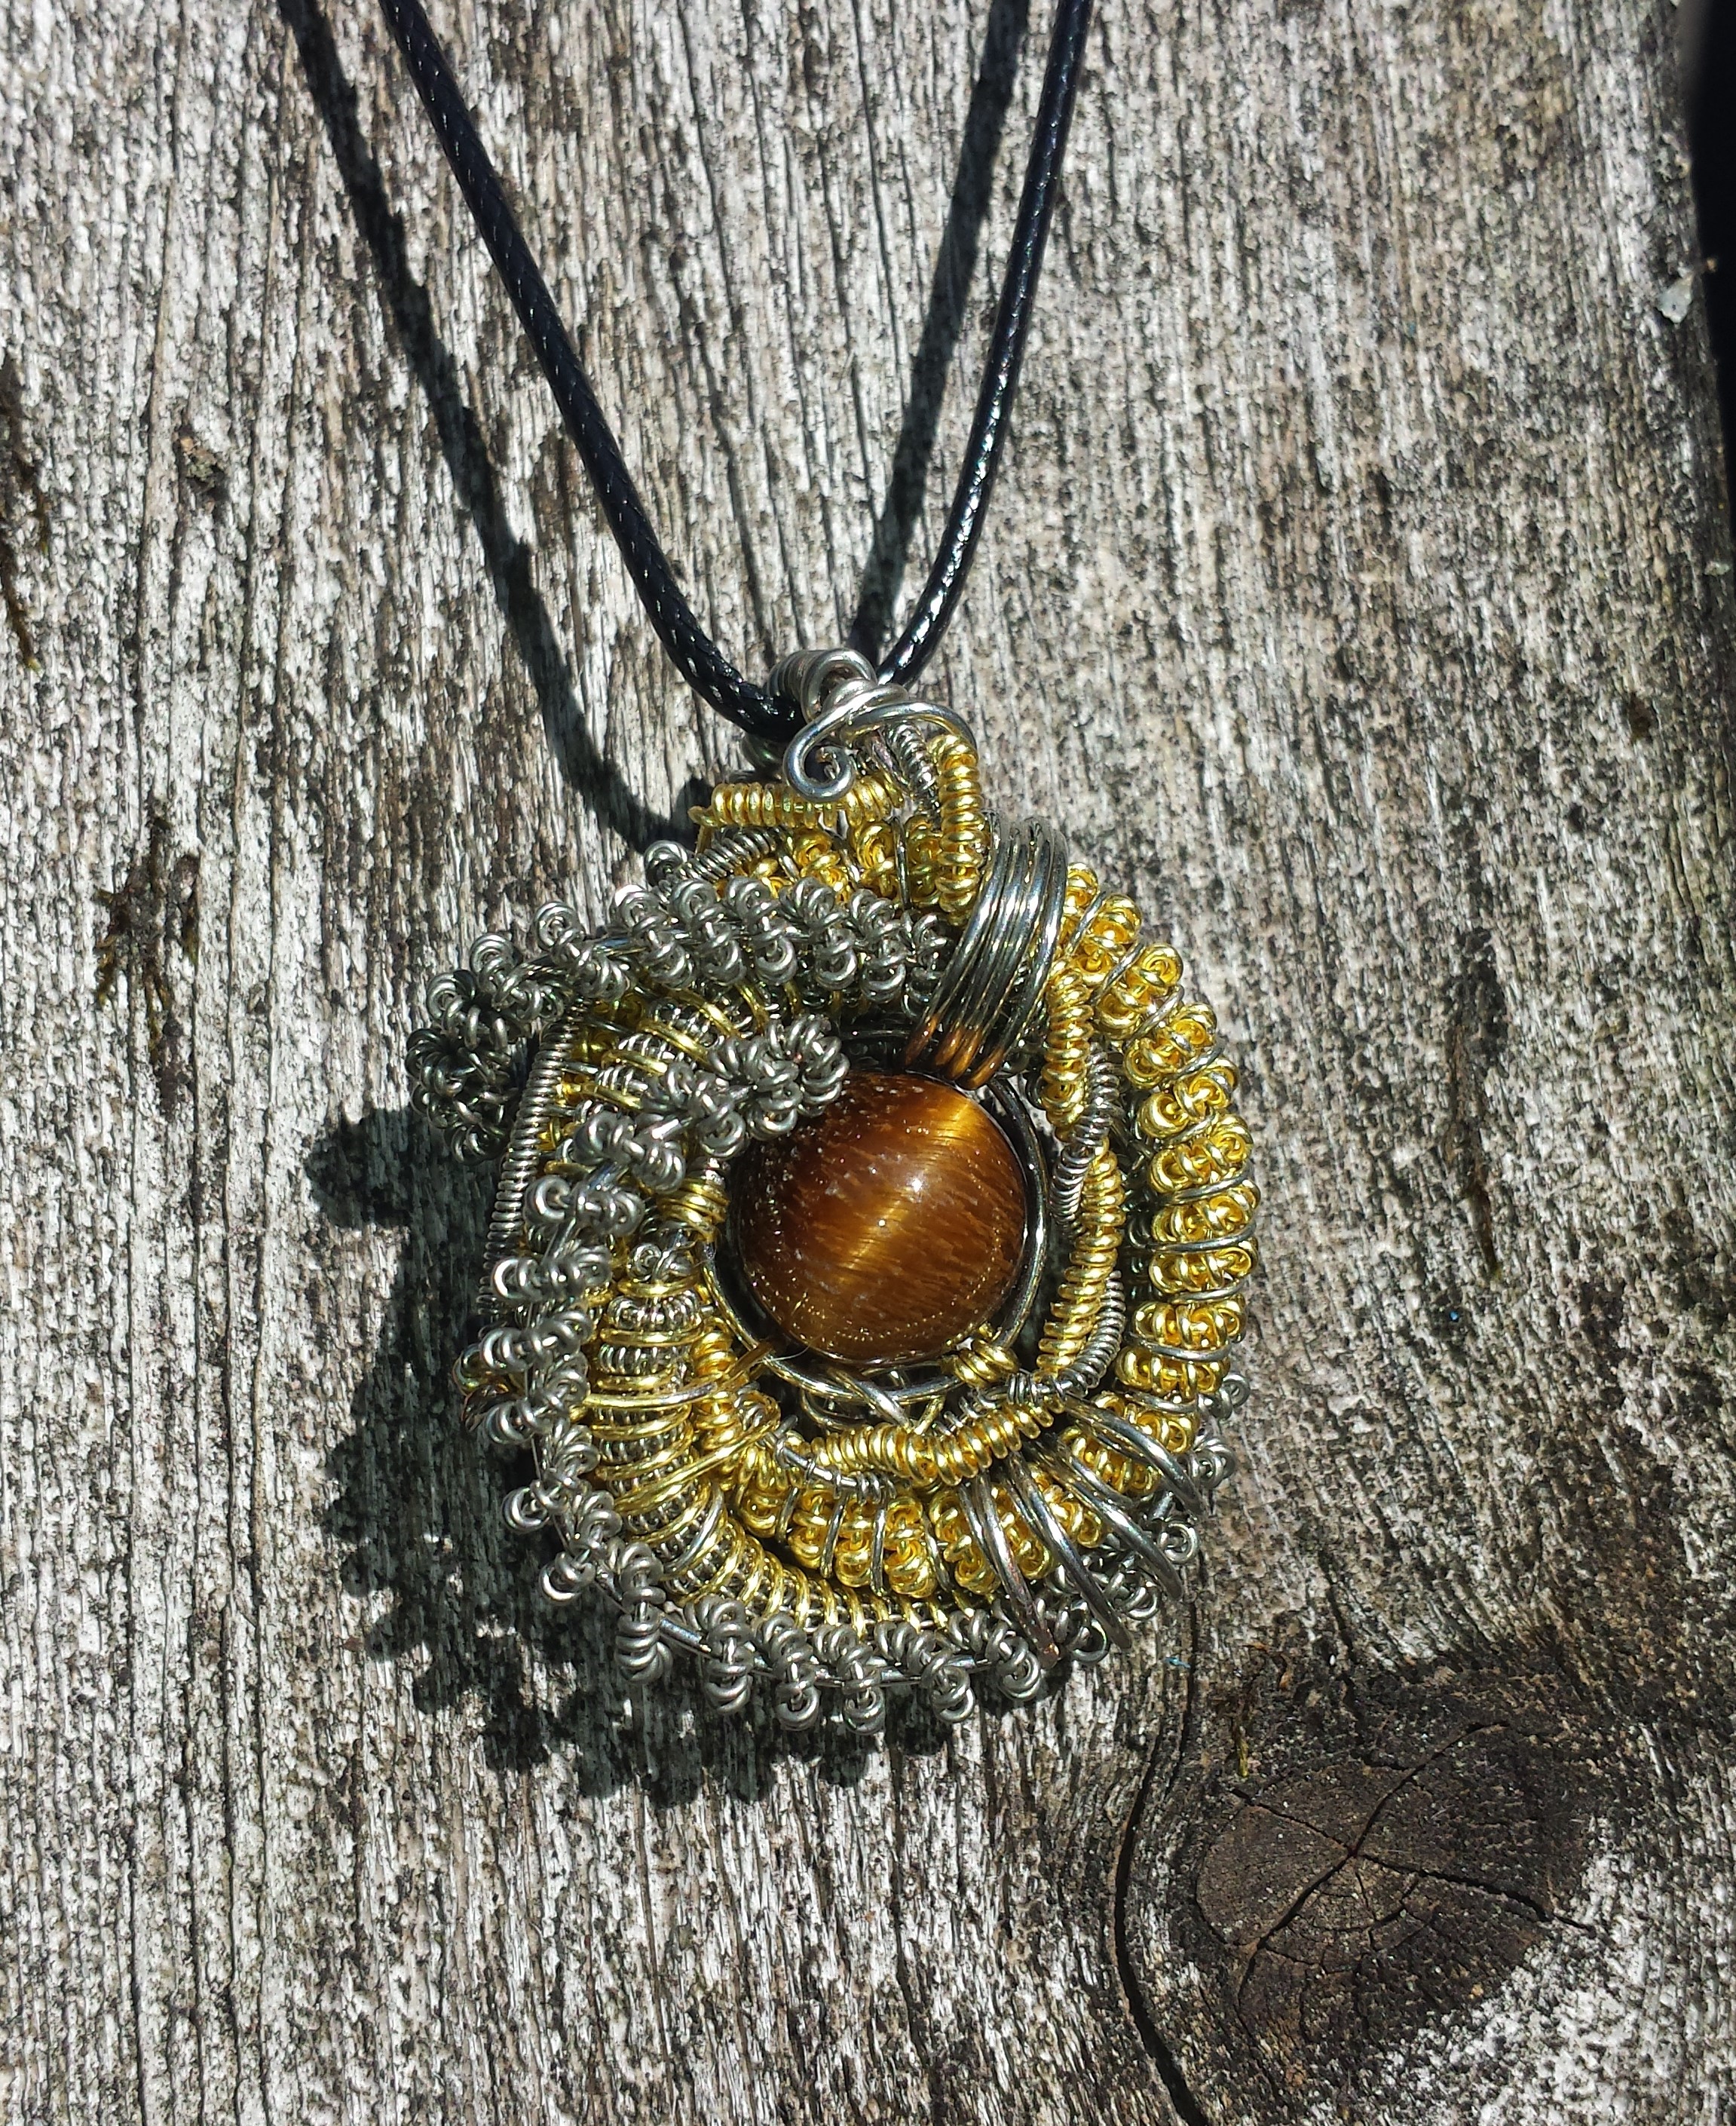 Tiger's Eye, necklace, pendant, magical, heady, brown, gold